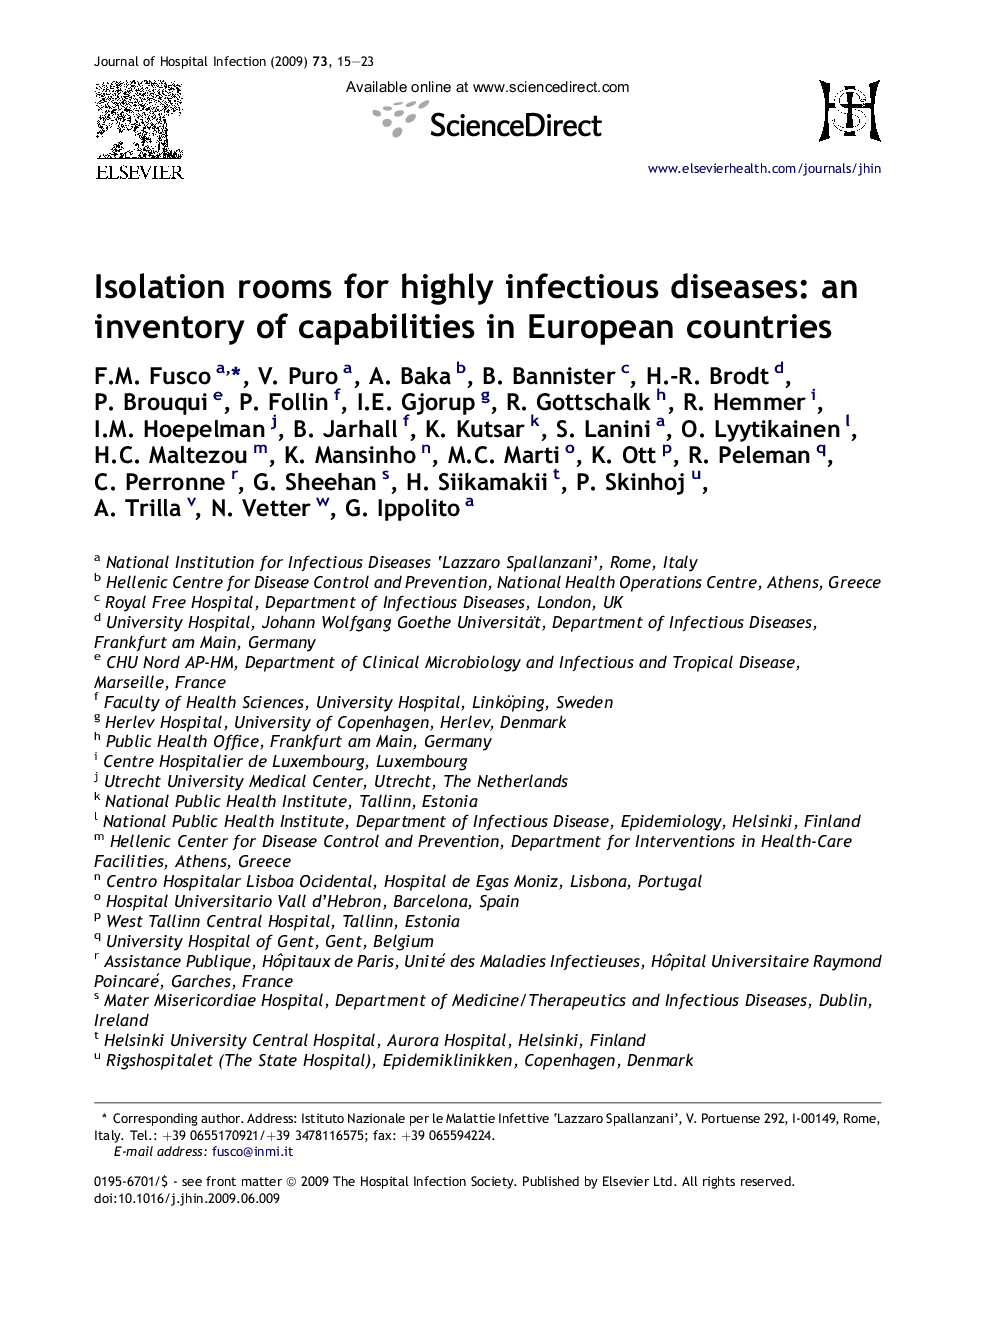 Isolation rooms for highly infectious diseases: an inventory of capabilities in European countries